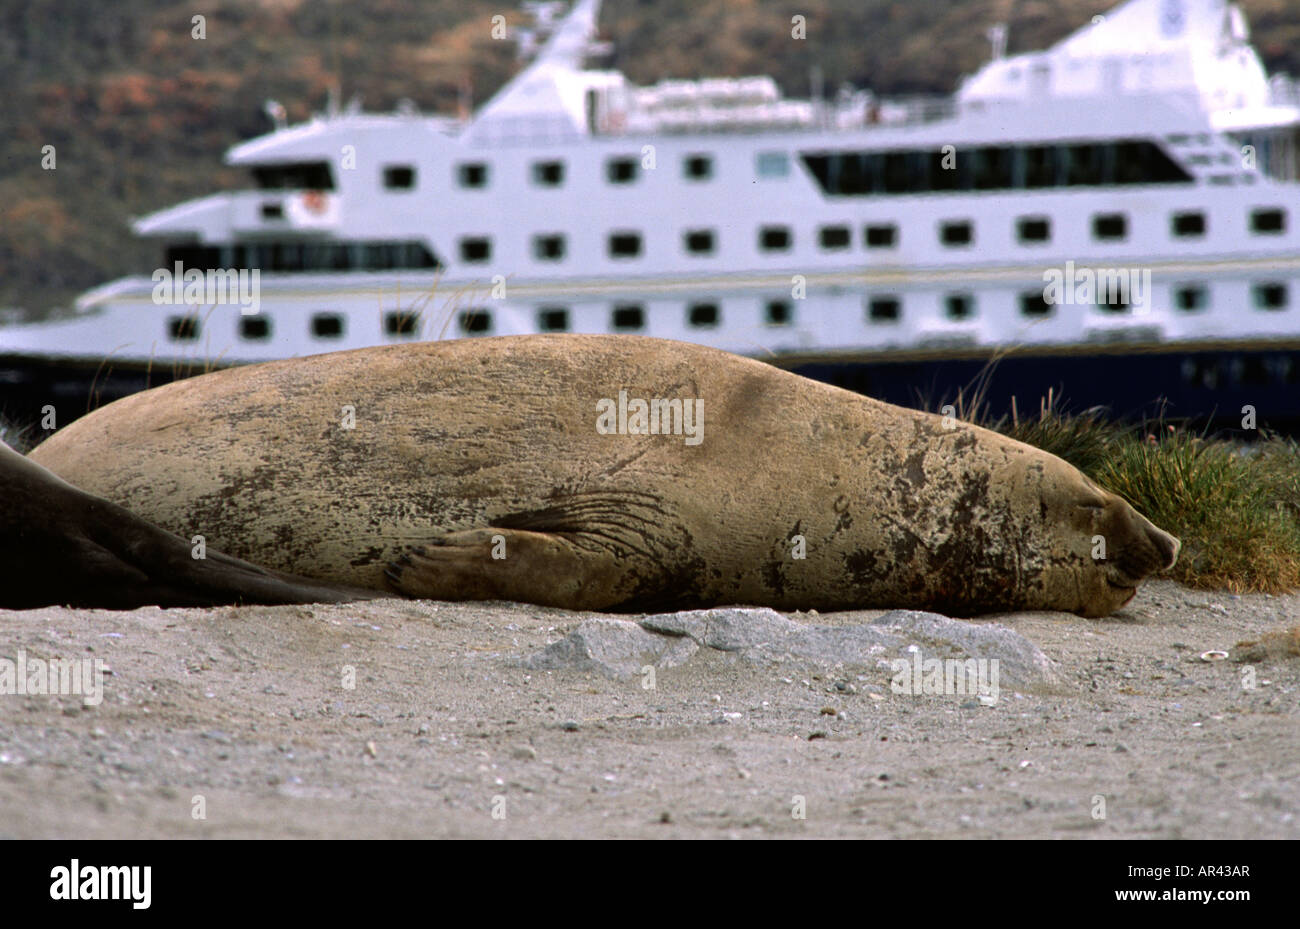 Chilean fjords south america, southern elephant seal and MV Mare Australis. Stock Photo